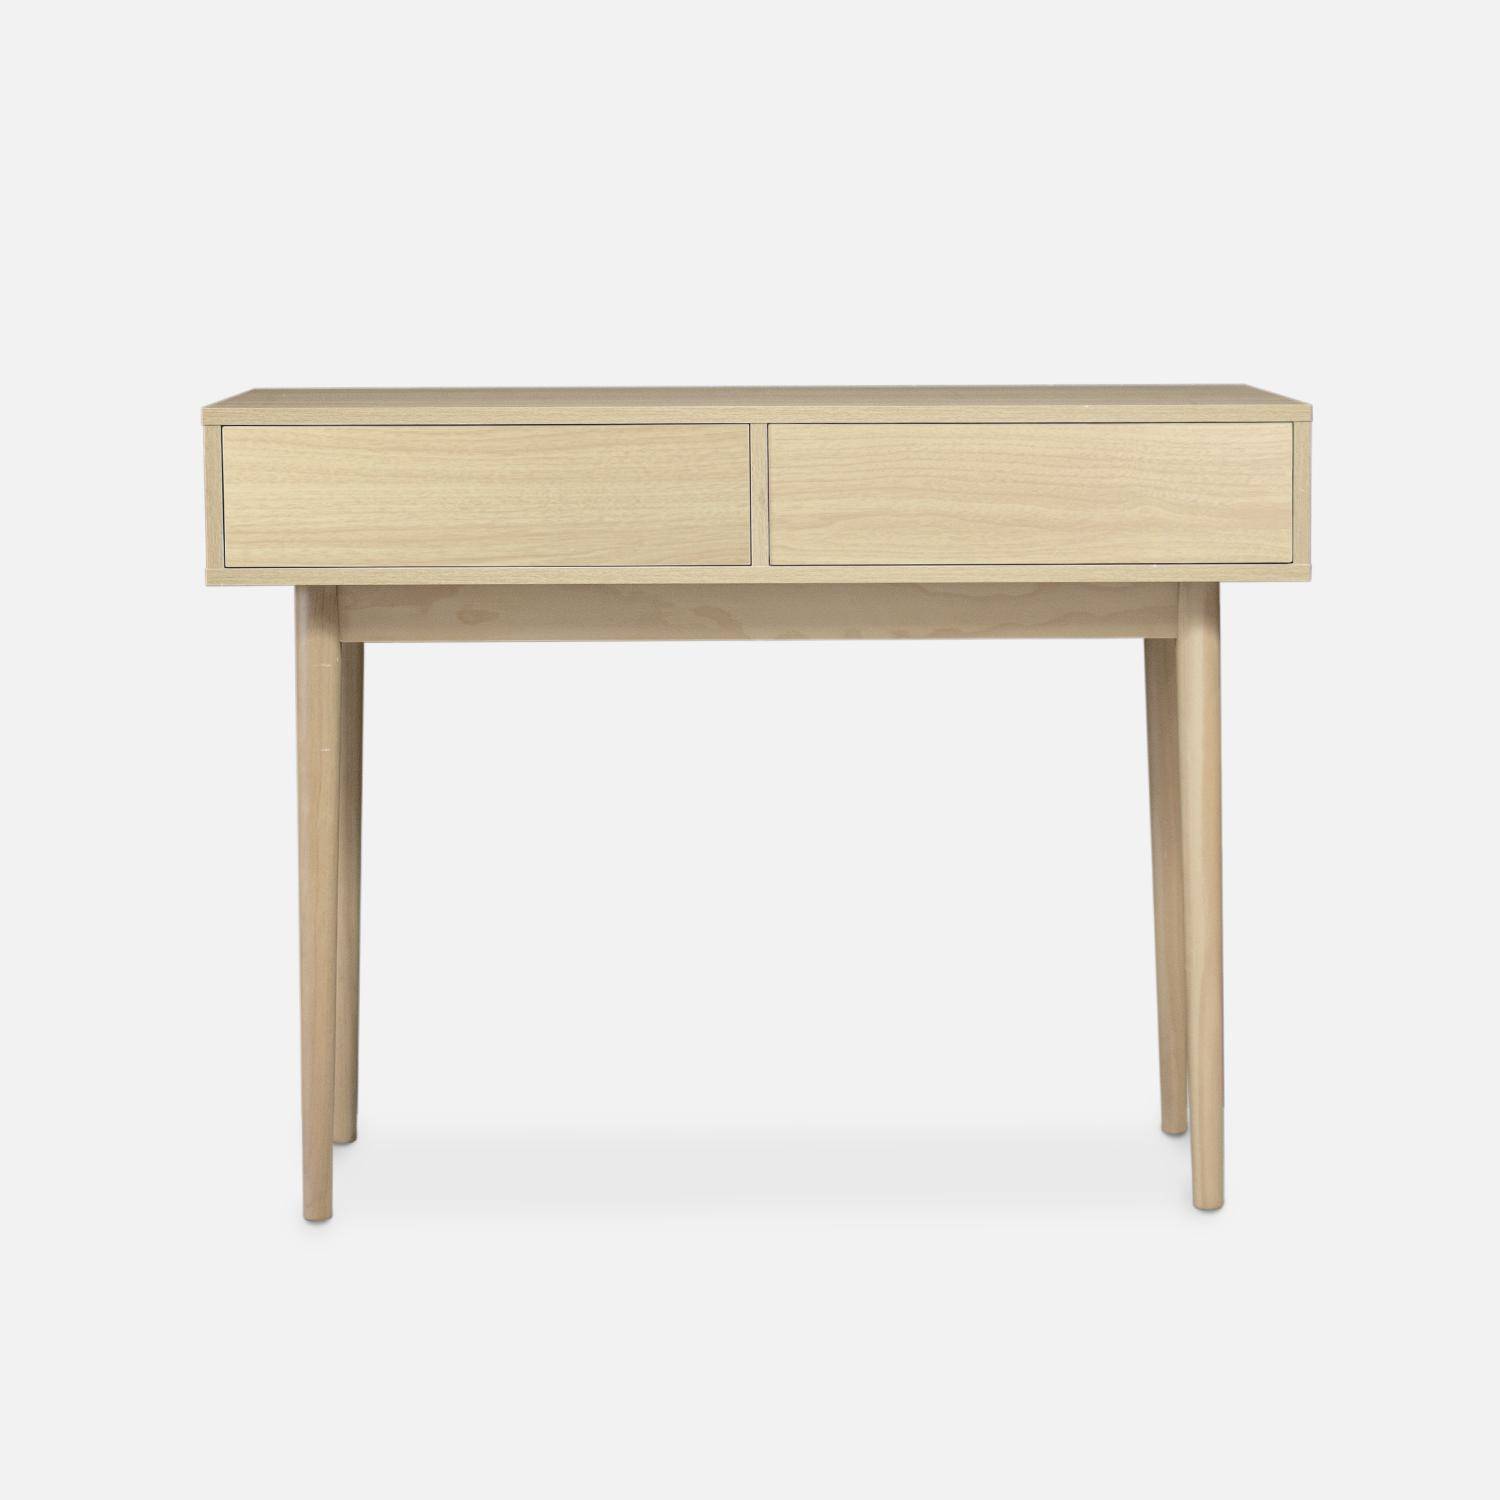 Wood-effect console table, 100x55x75cm, Mika, Natural wood colour Photo4